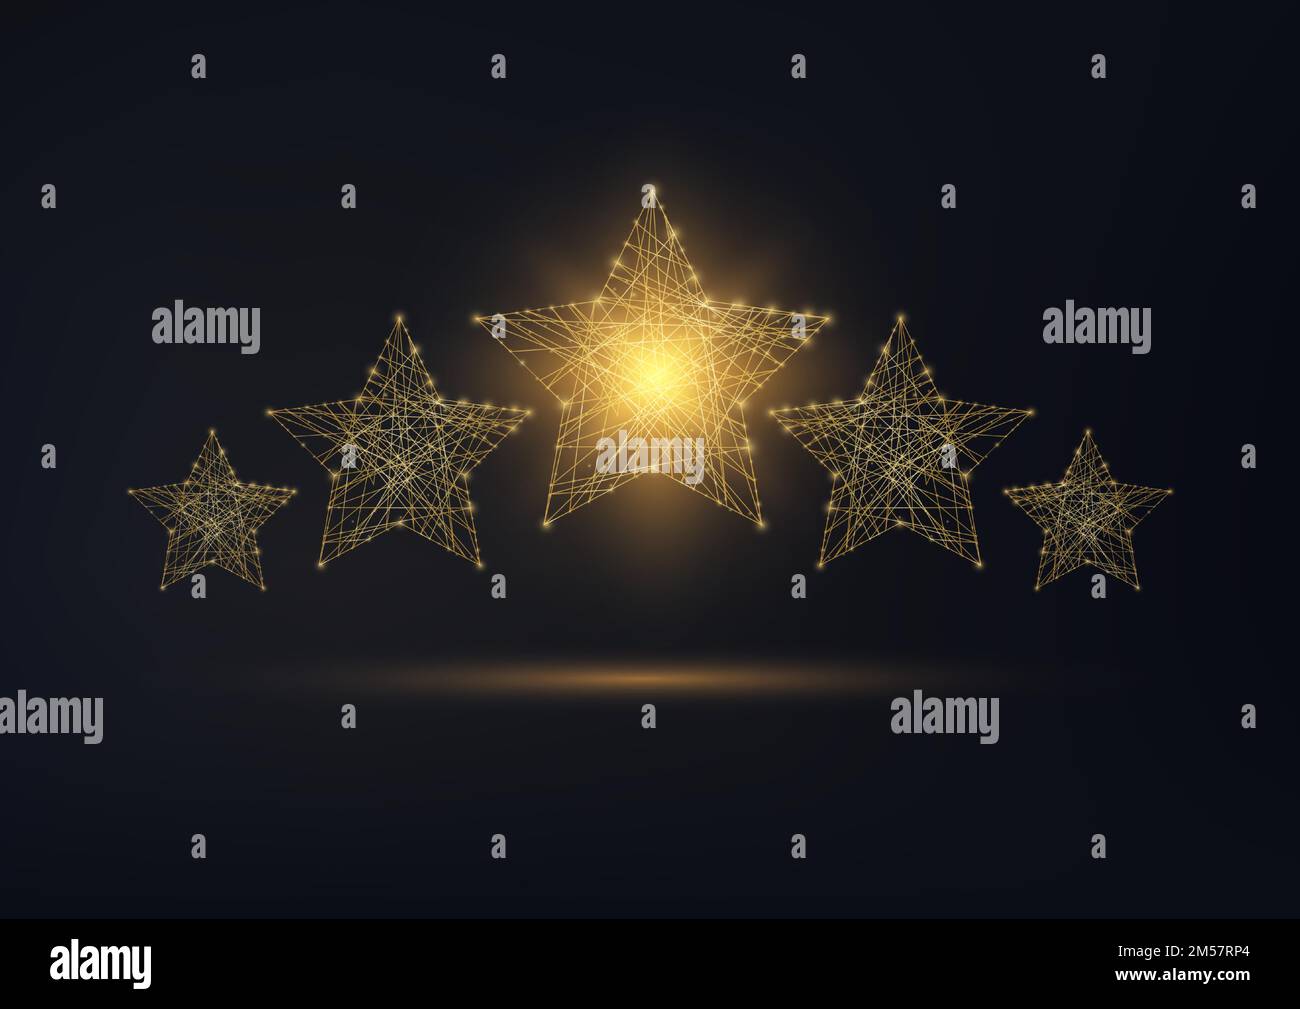 Five stars rating, luxury service, client satisfaction concept. Golden glowing low polygonal wireframe design on black background. Vector illustration Stock Vector